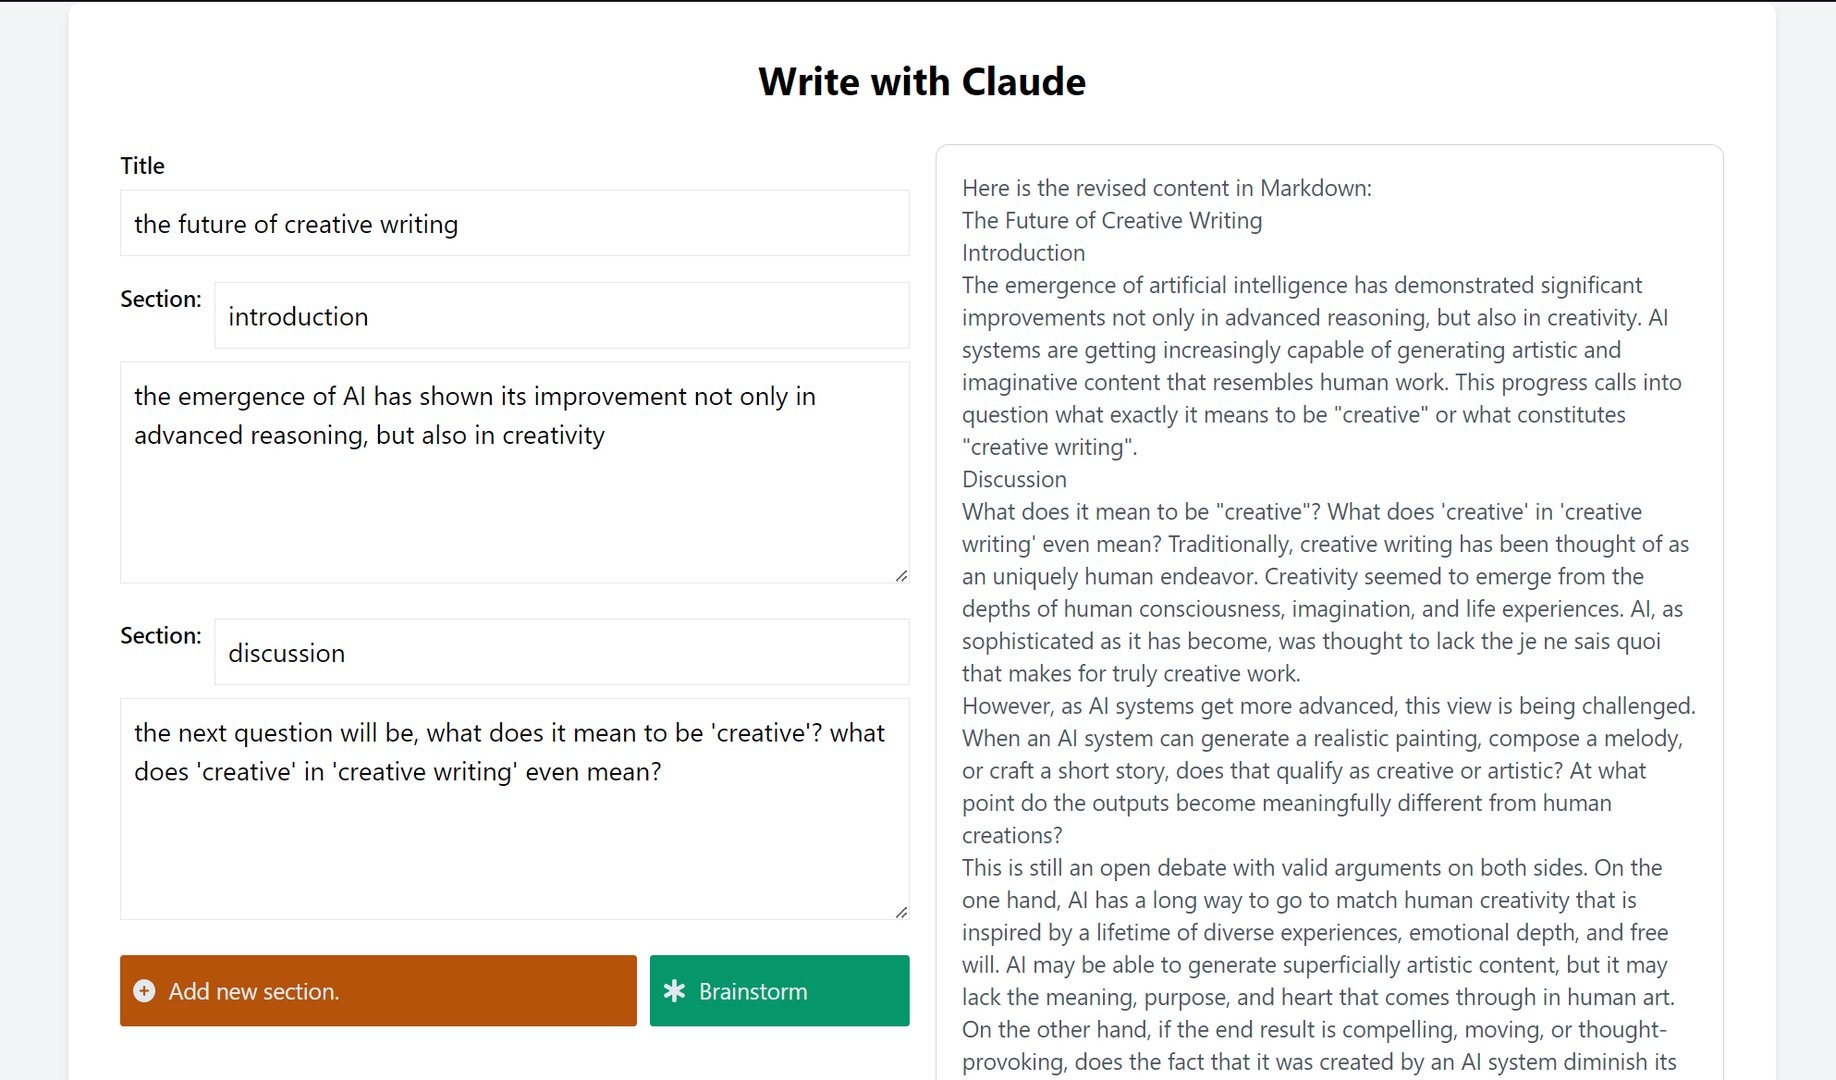 the response from Anthropic Claude API is displayed again. This time, the AI refused to elaborate on the idea of warmongering, and instead suggested that we consider how to develop AI's creative abilities